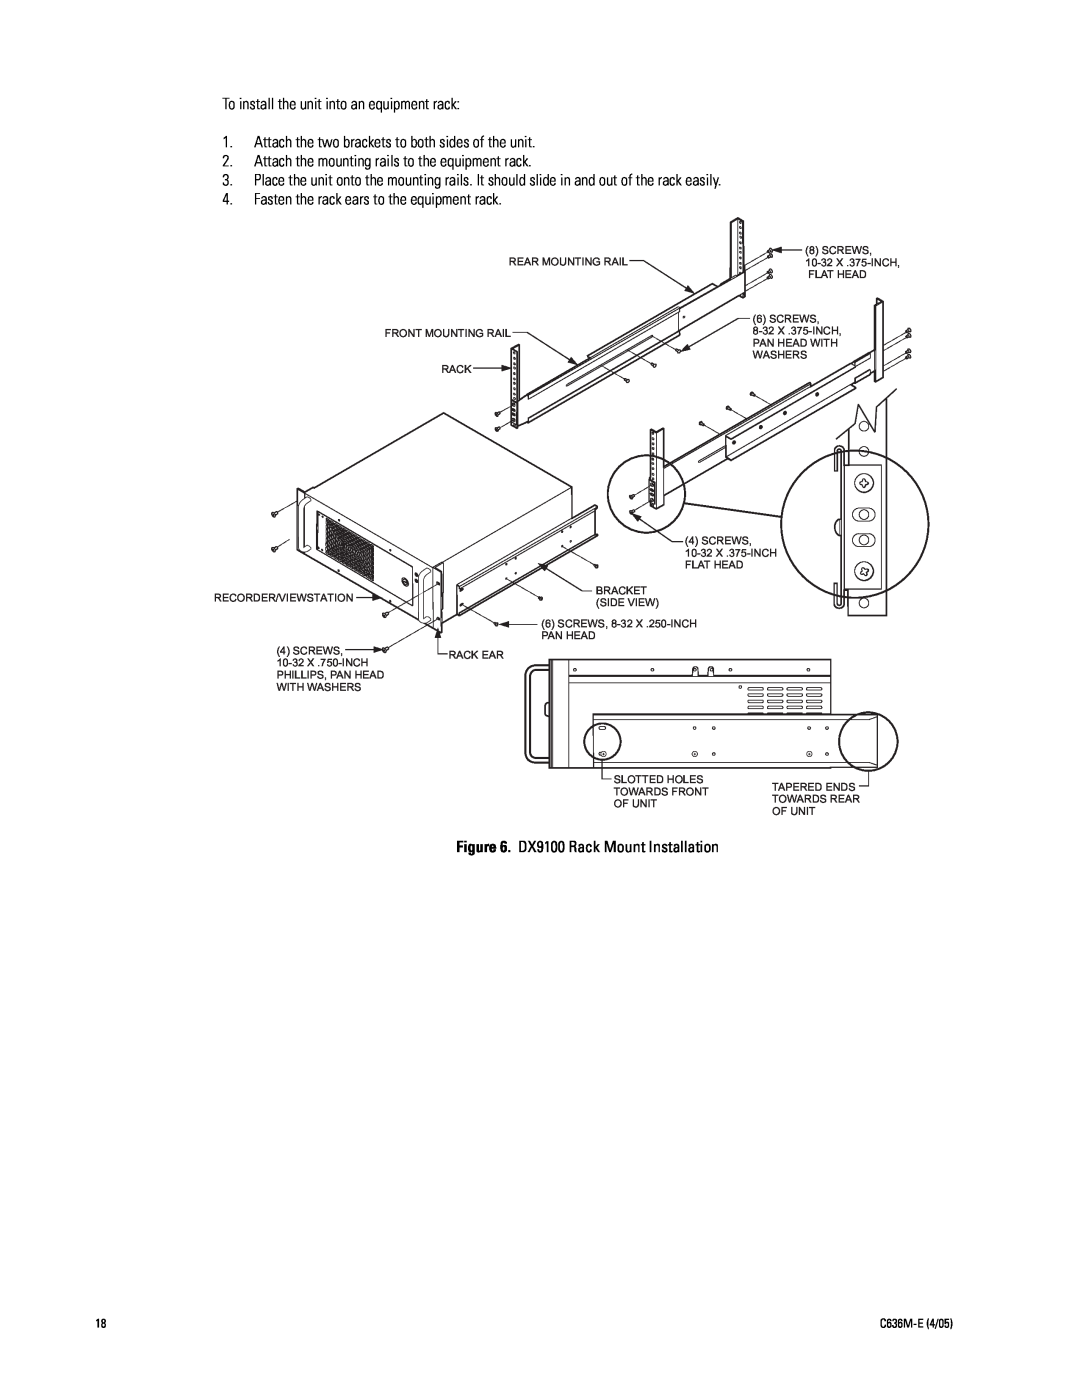 Pelco DX9100 installation manual To install the unit into an equipment rack 